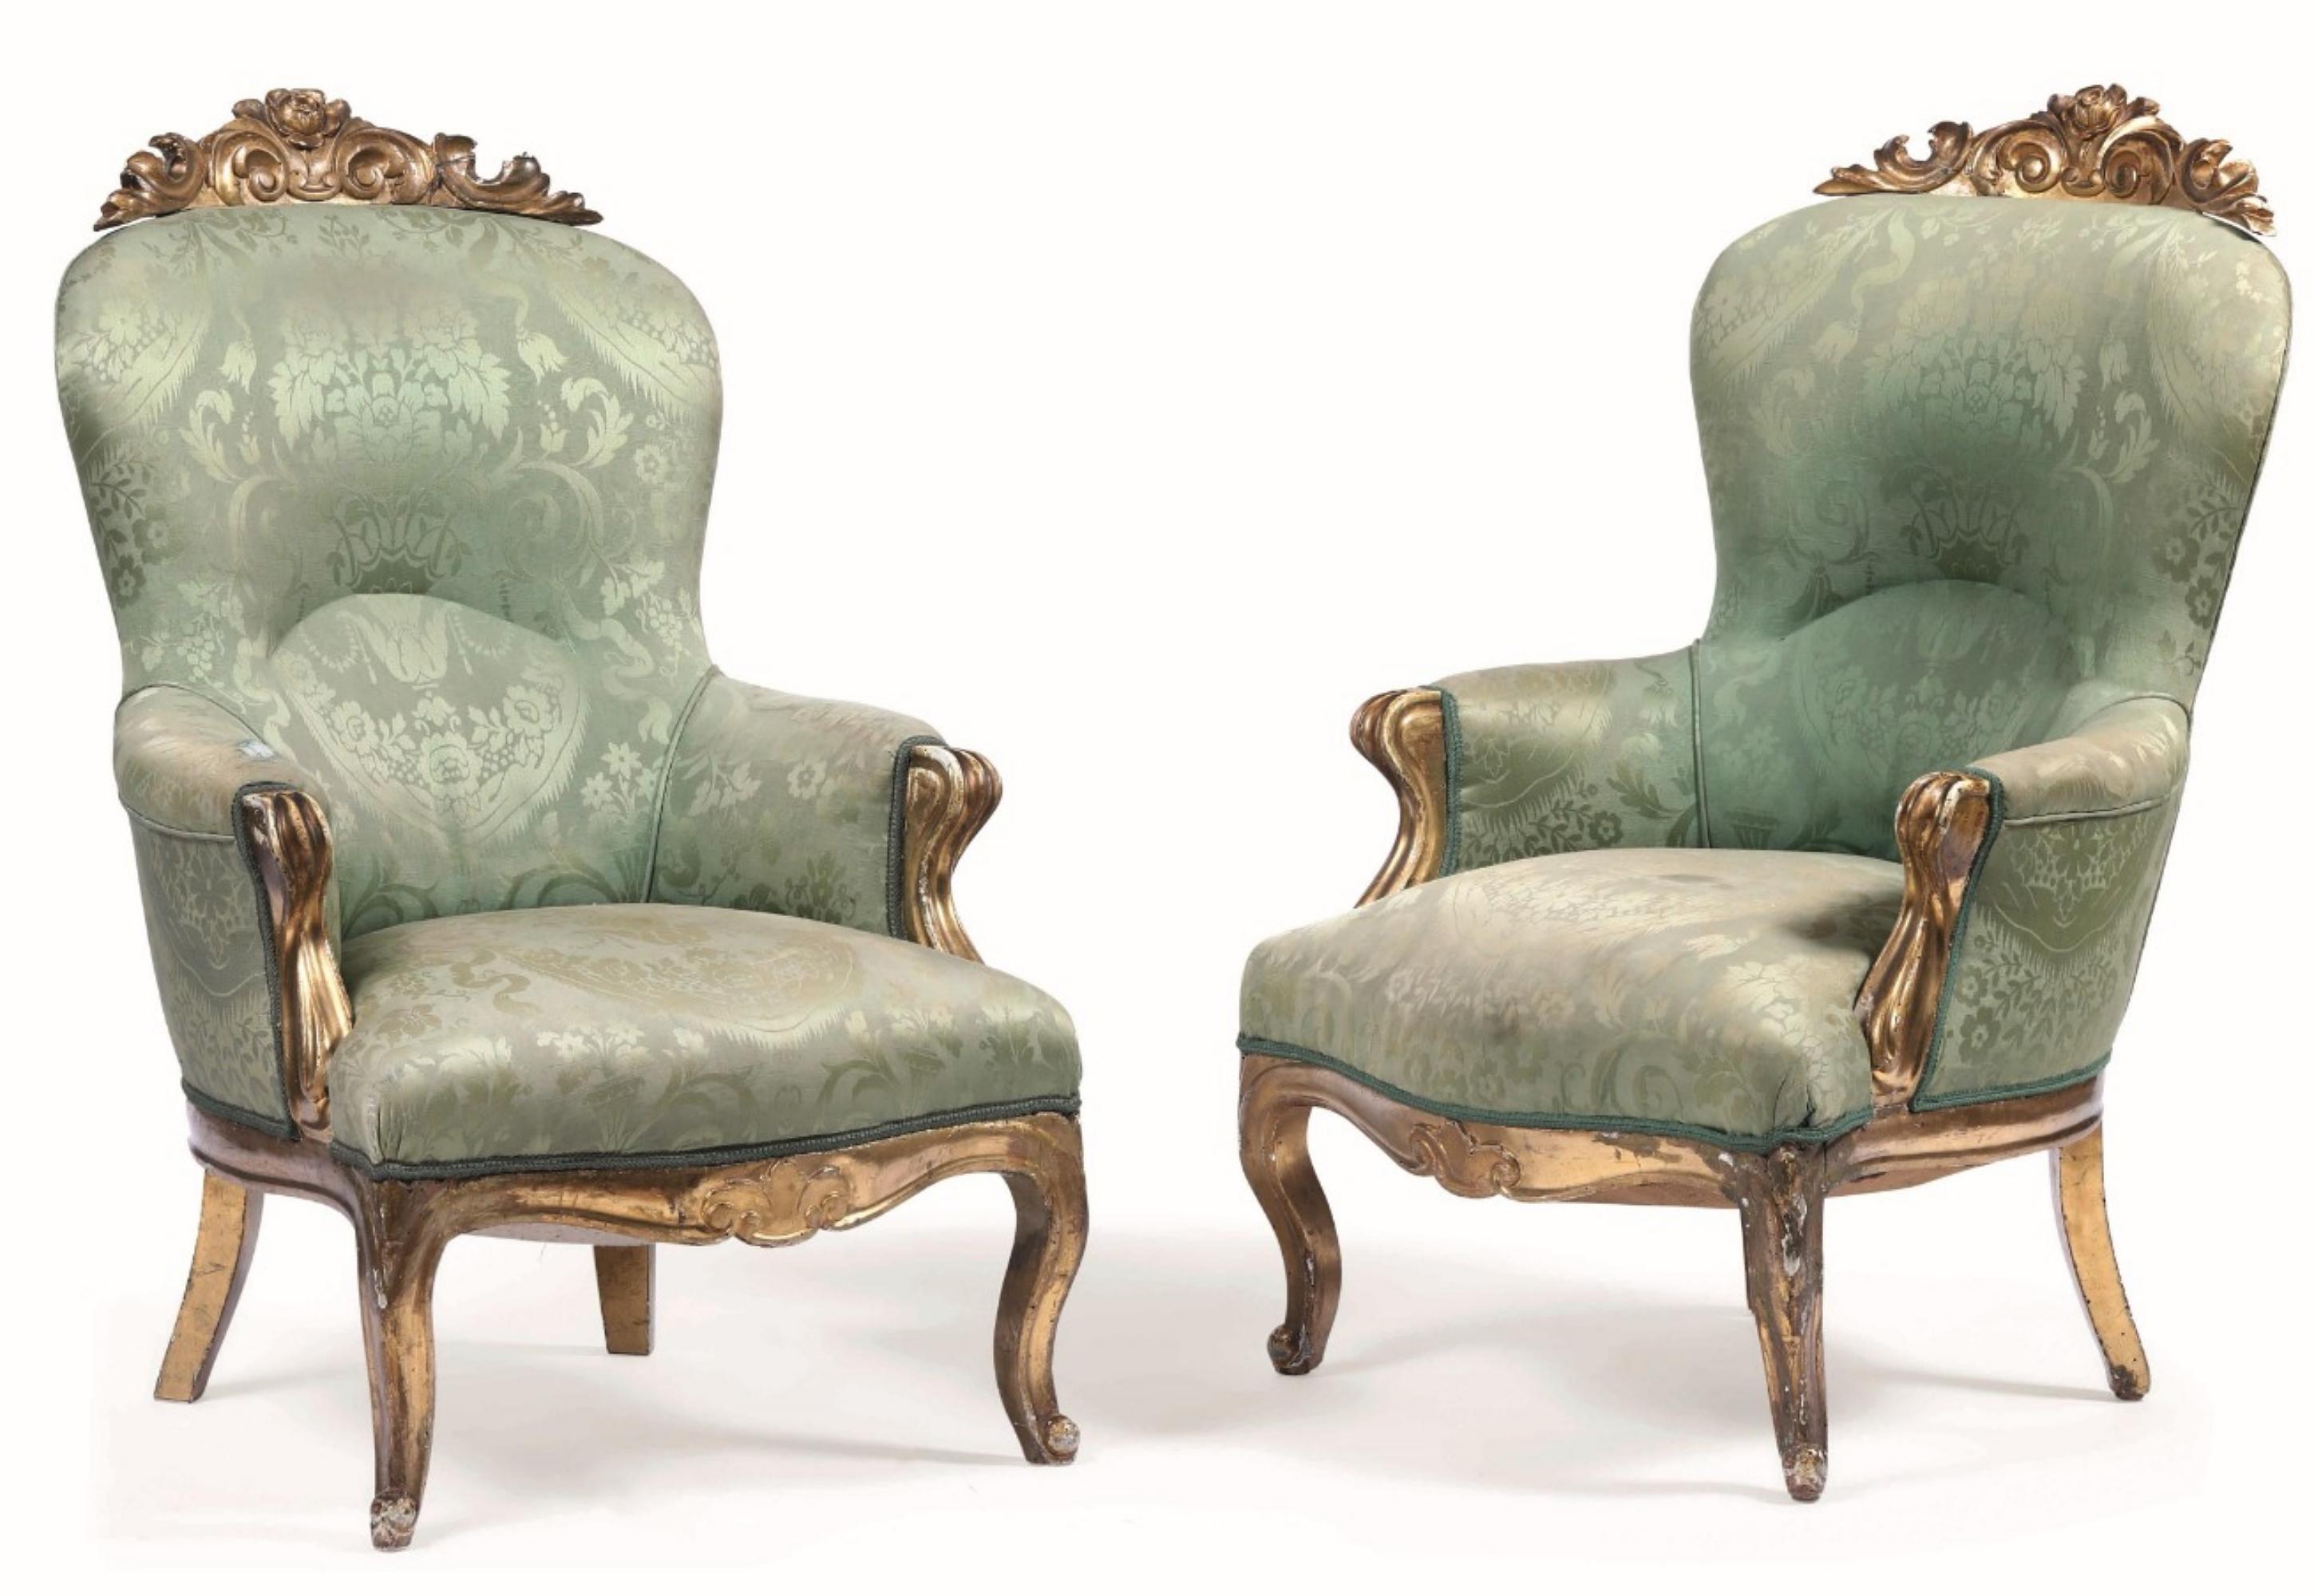 Pair of armchairs in carved and gilded wood.
19th Century
Covered in green damask fabric,
Measures: W. 70 - D. 70 - H. 100 Cm
Good conditions.